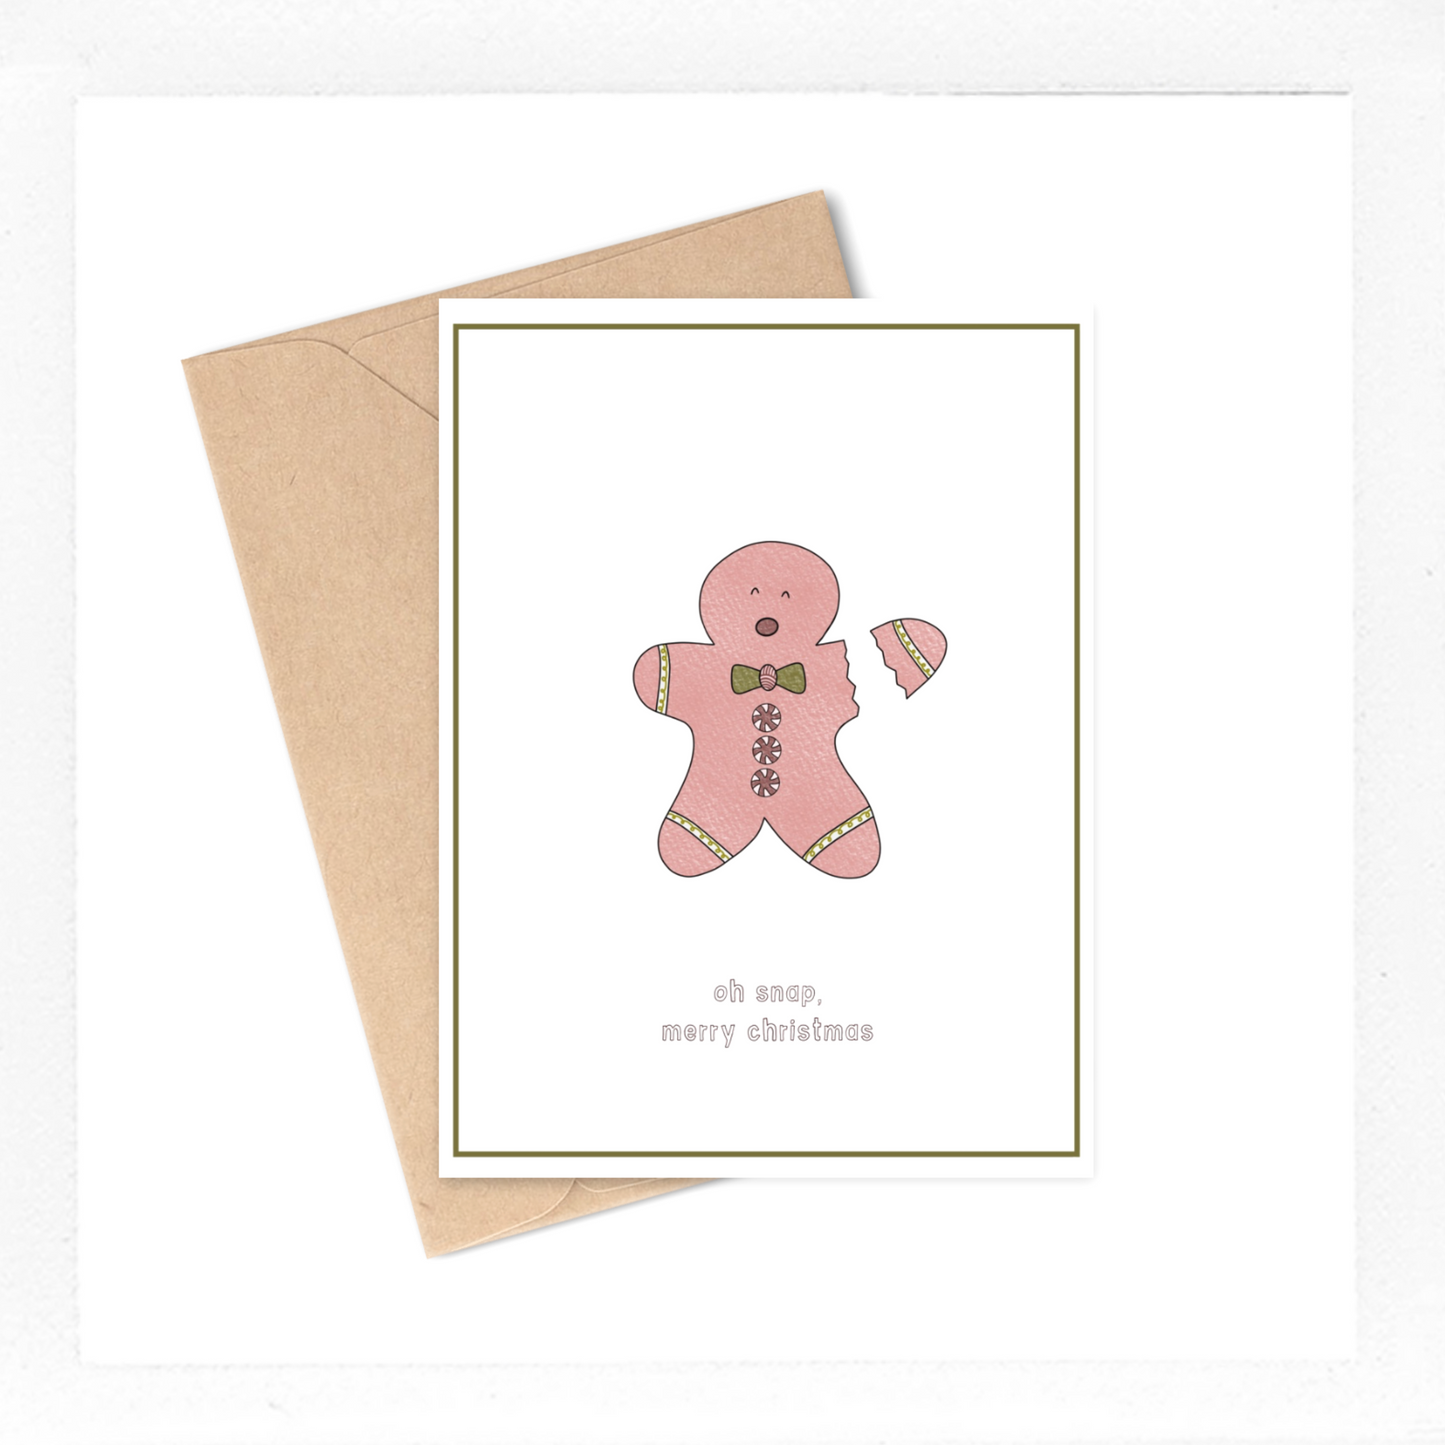 gingerbread man card - oh snap merry christmas